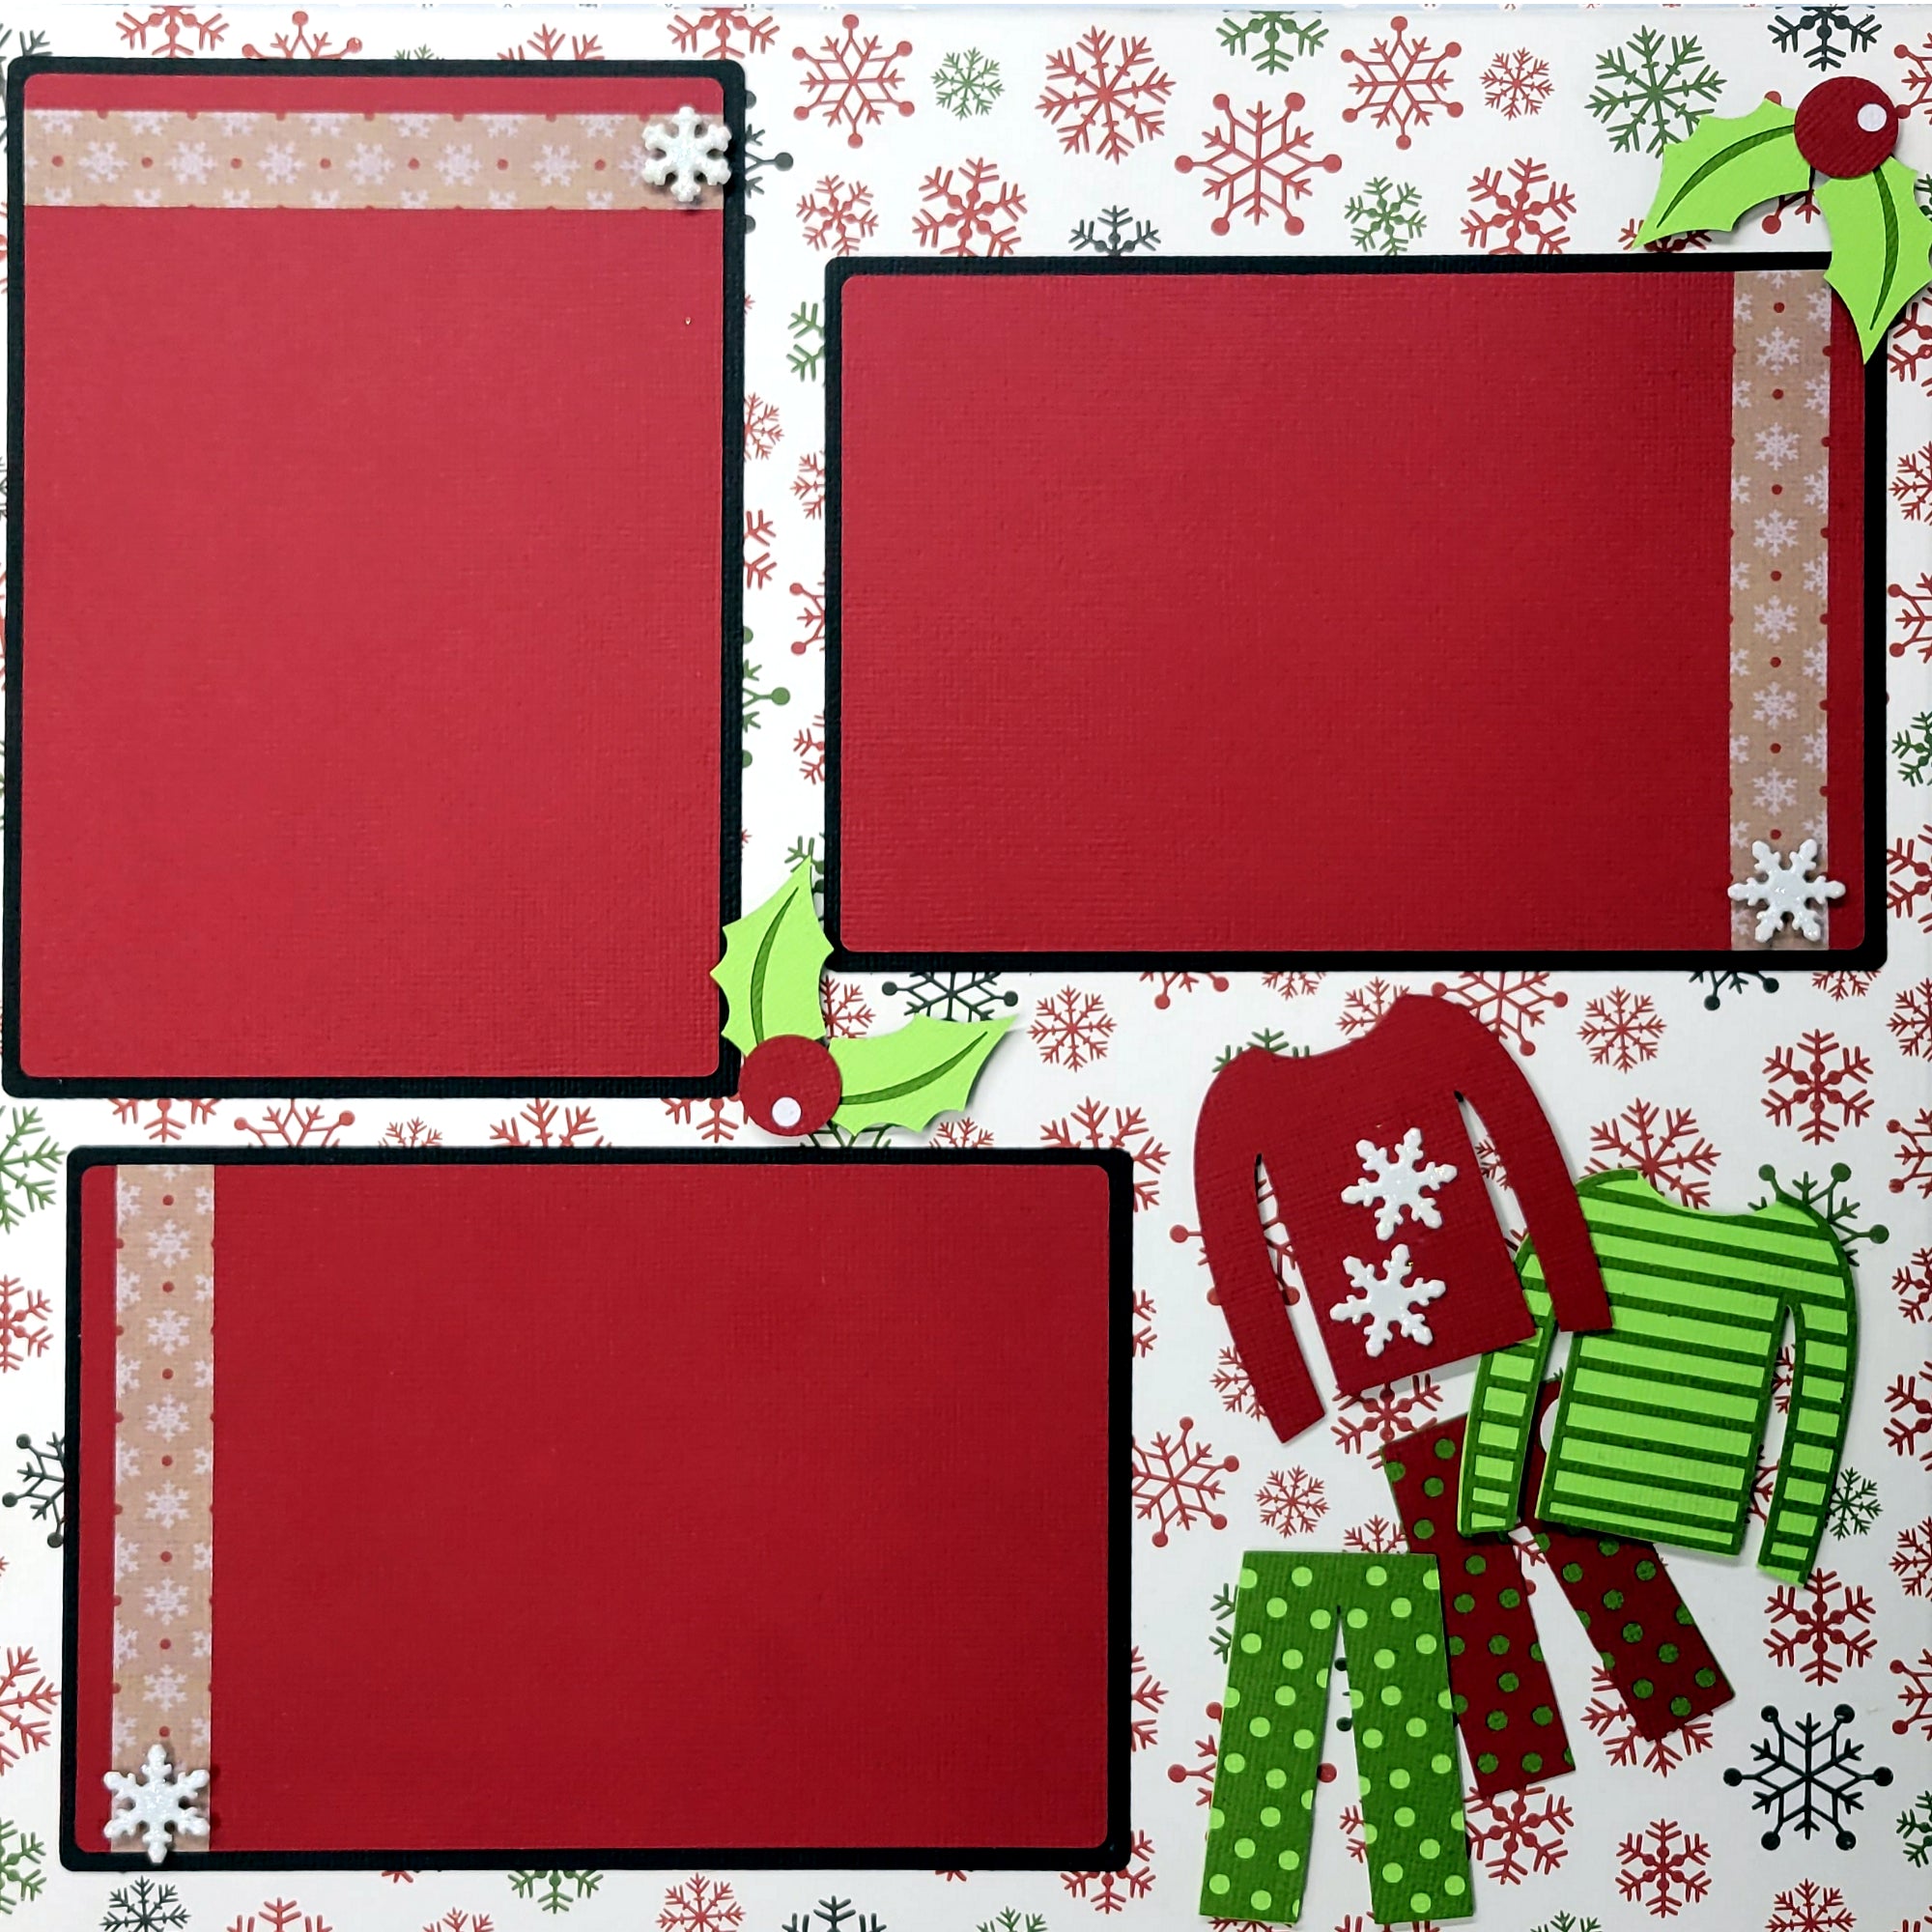 Christmas Pajamas (2) - 12 x 12 Pages, Fully-Assembled & Hand-Crafted 3D Scrapbook Premade by SSC Designs